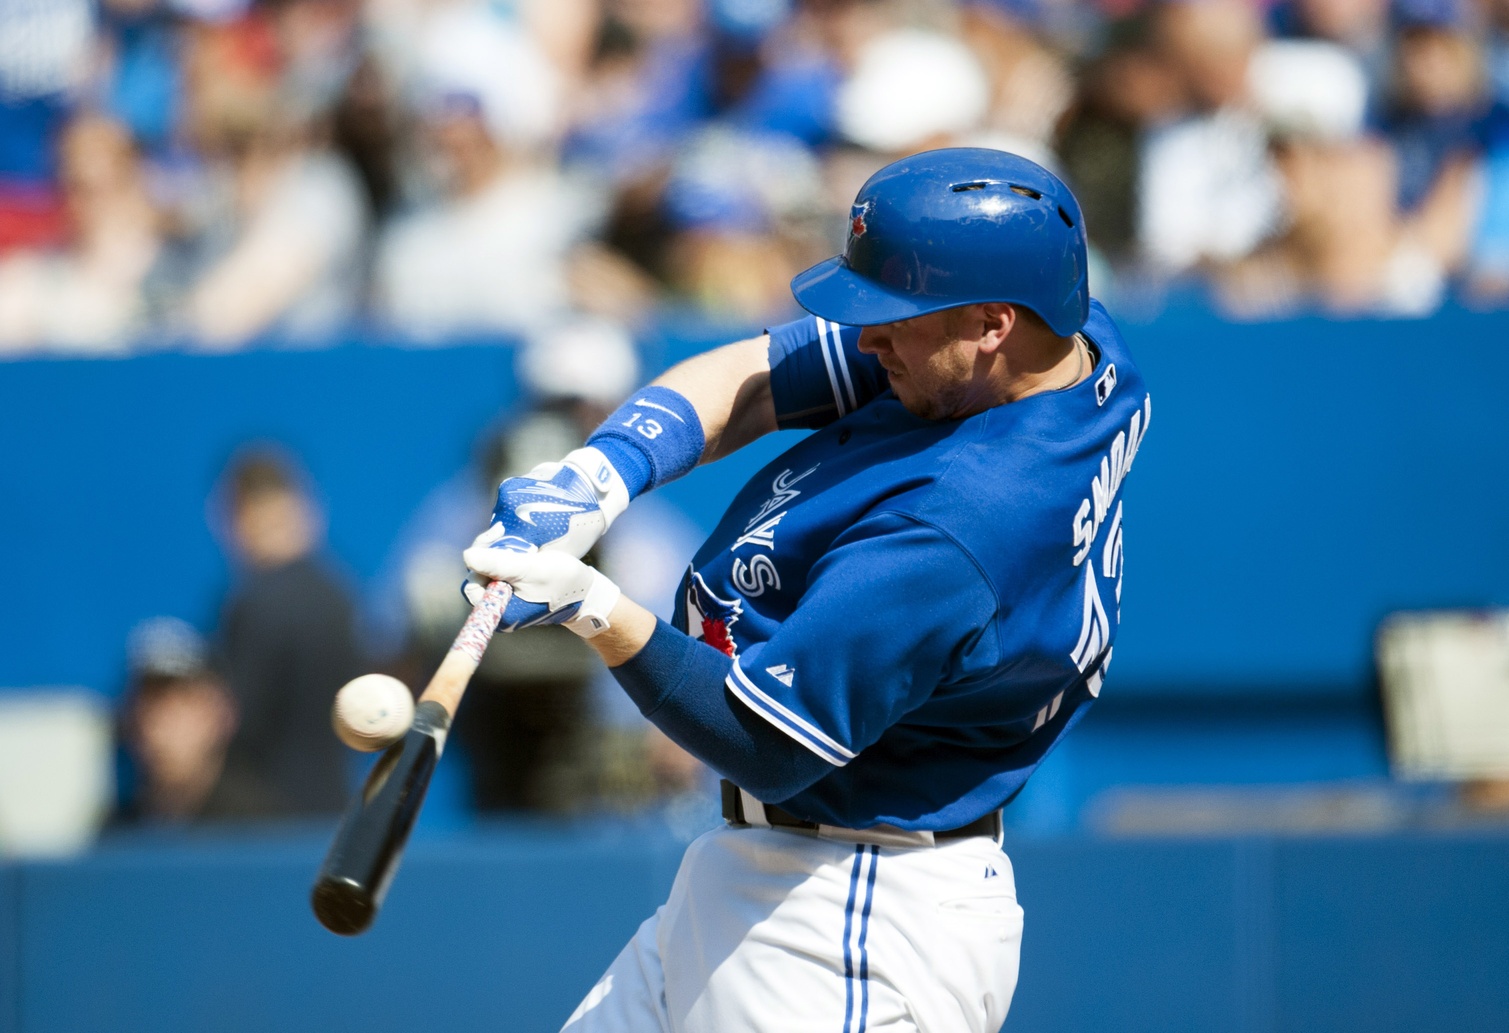 Sep 5, 2015; Toronto, Ontario, CAN; Toronto Blue Jays first baseman Justin Smoak (13) bats against Baltimore Orioles during the sixth inning at Rogers Centre. Jays beat Orioles 5 - 1. Mandatory Credit: Peter Llewellyn-USA TODAY Sports